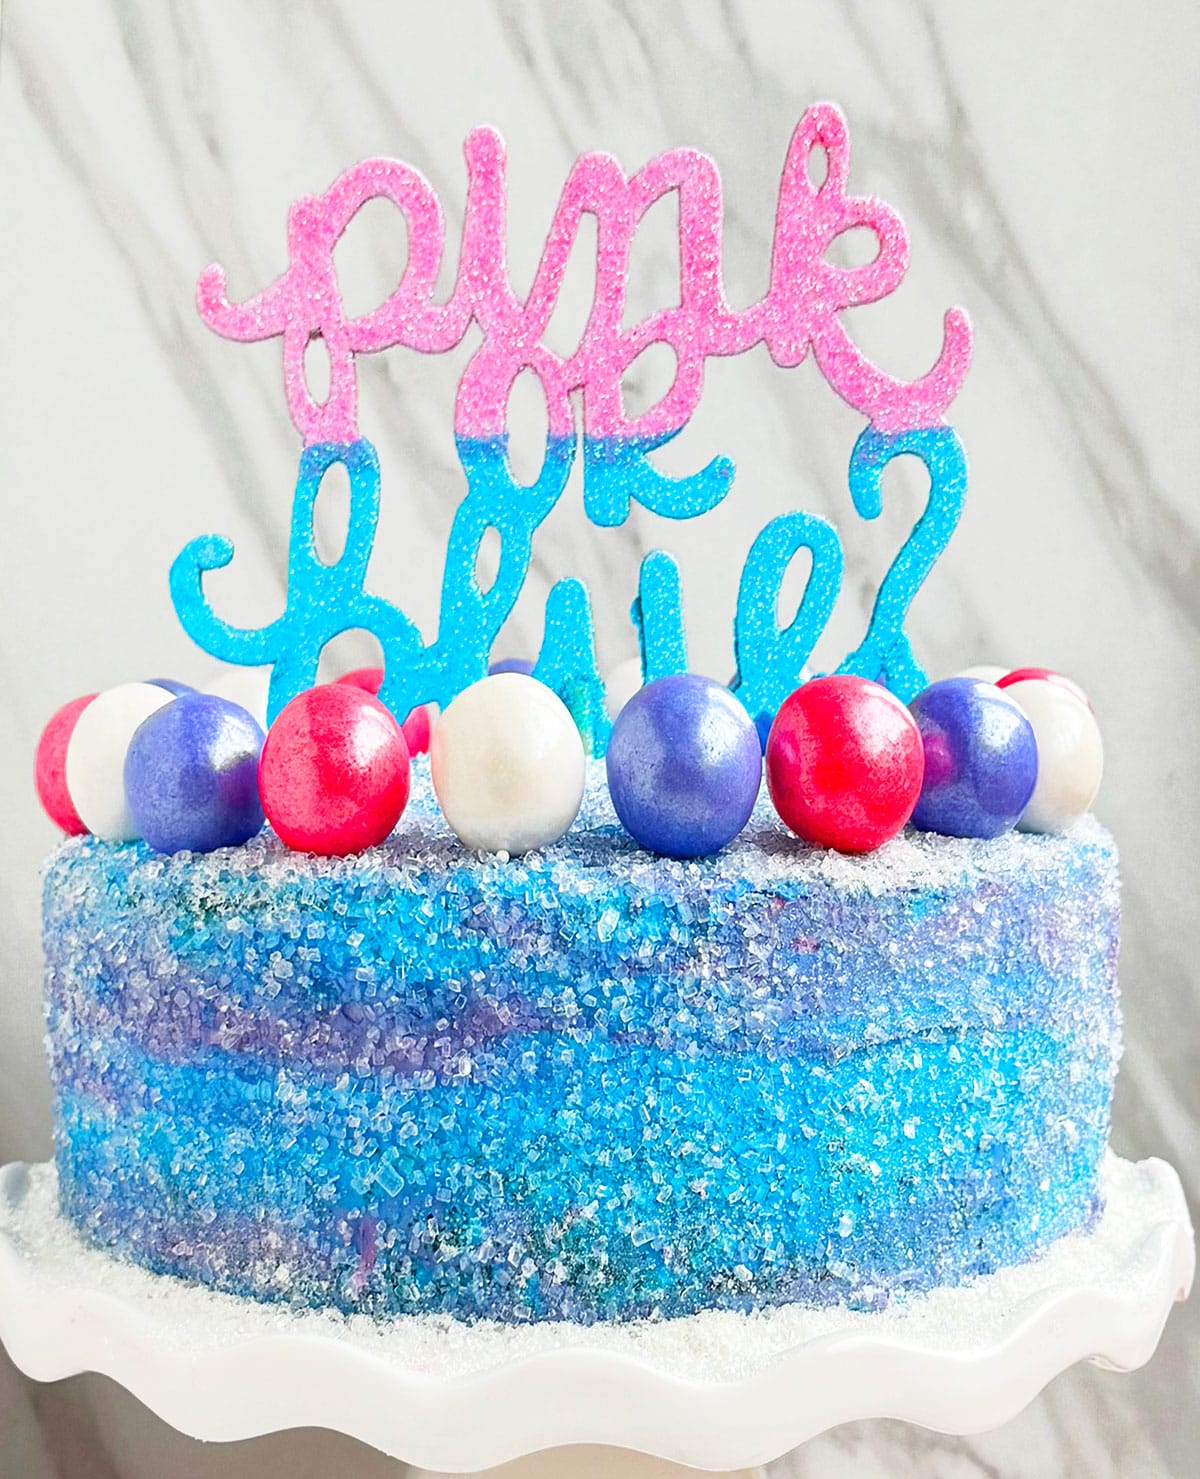 Easy Homemade Gender Reveal Cake With Pink and Blue Buttercream Icing on White Dish. 